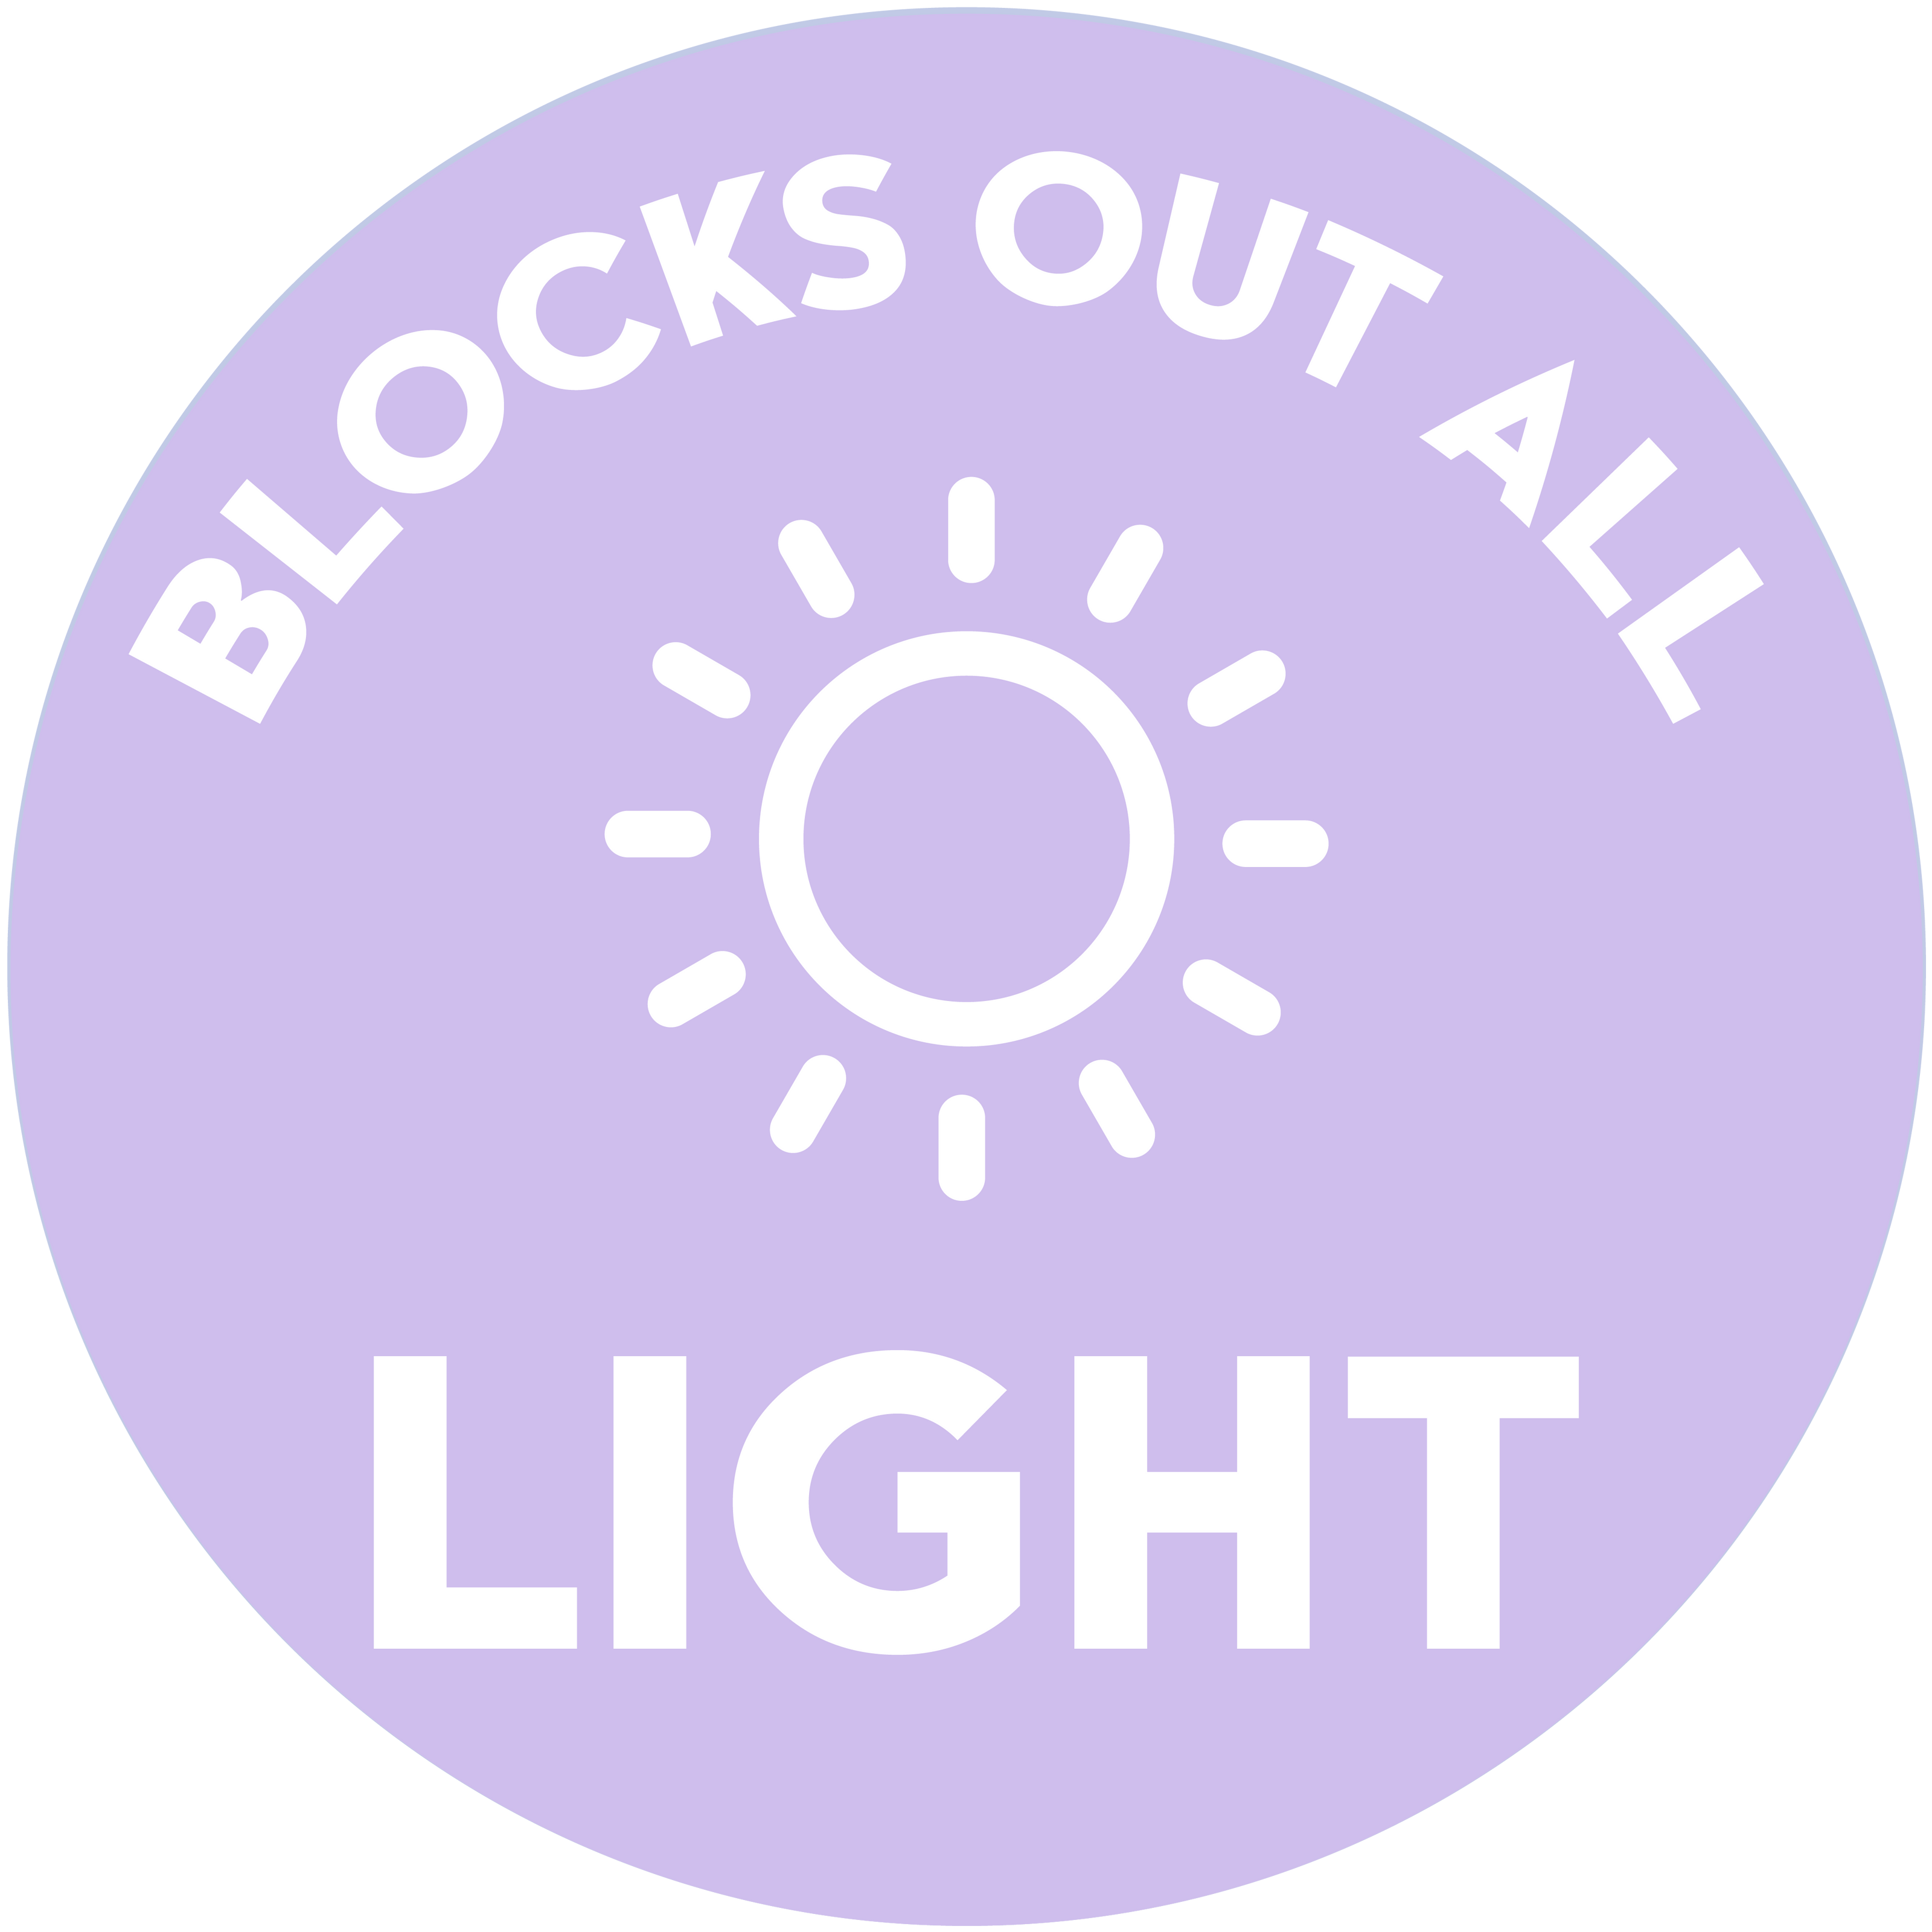 Blocks out all light